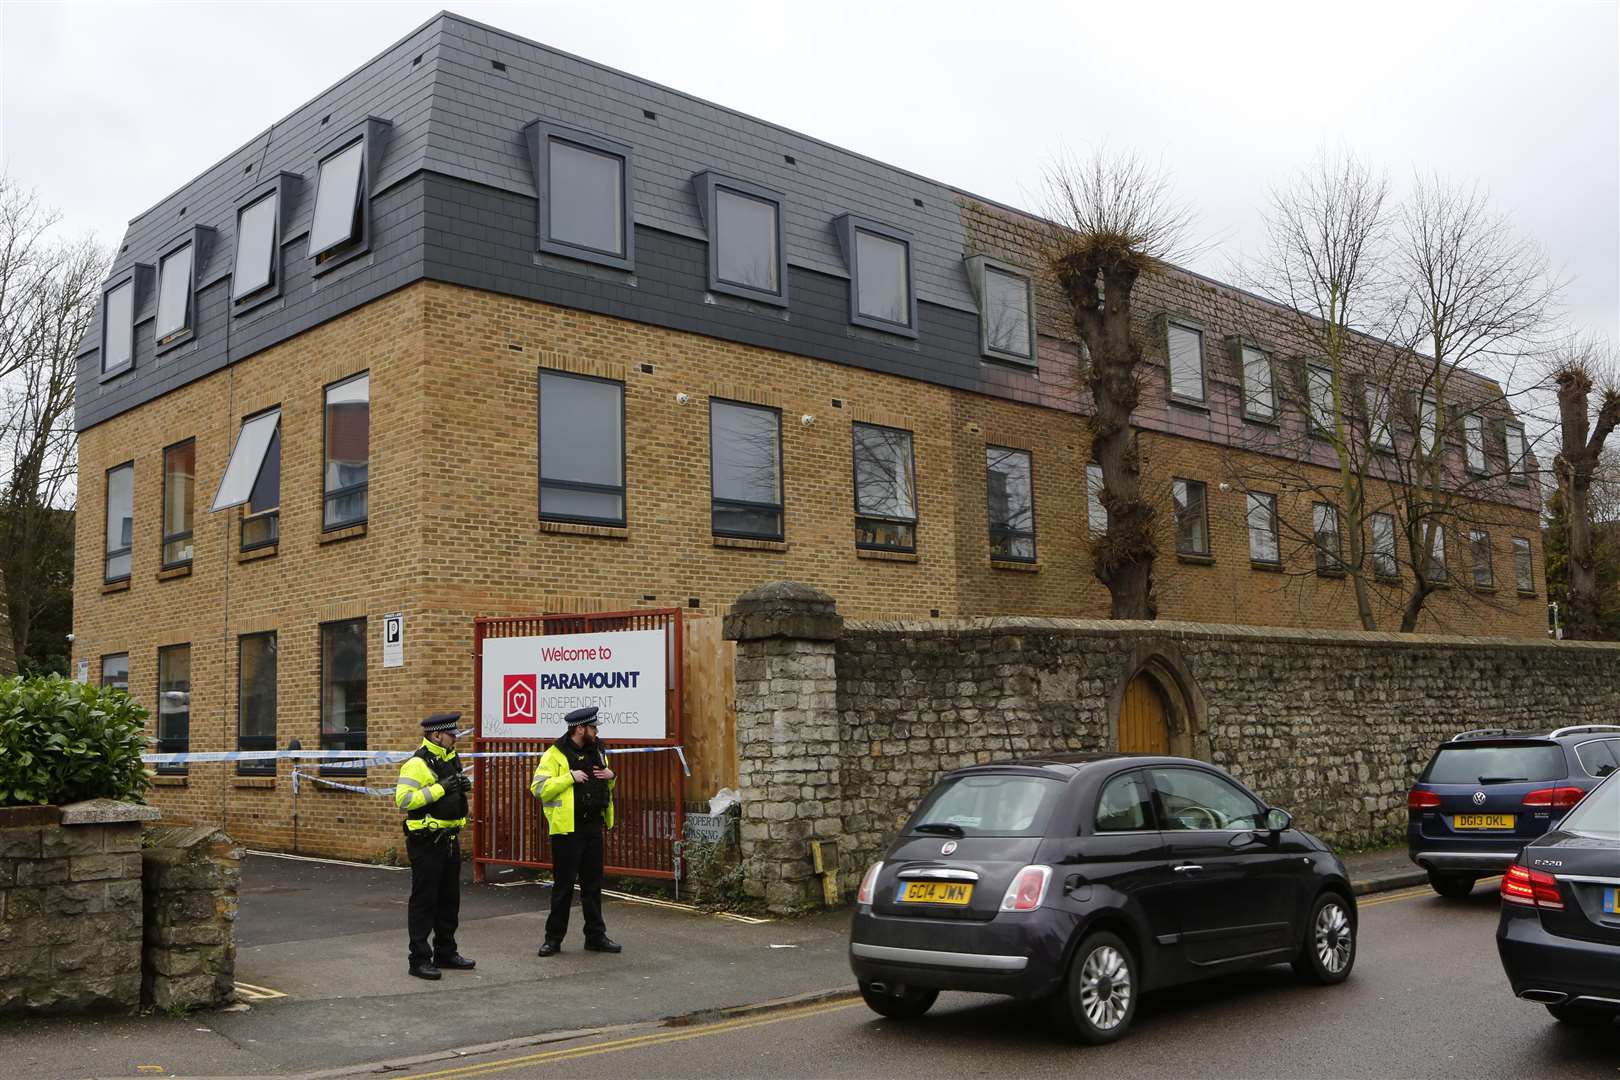 Officers on the scene at Chaucer House, Knightrider Street, Maidstone. Picture: Andy Jones